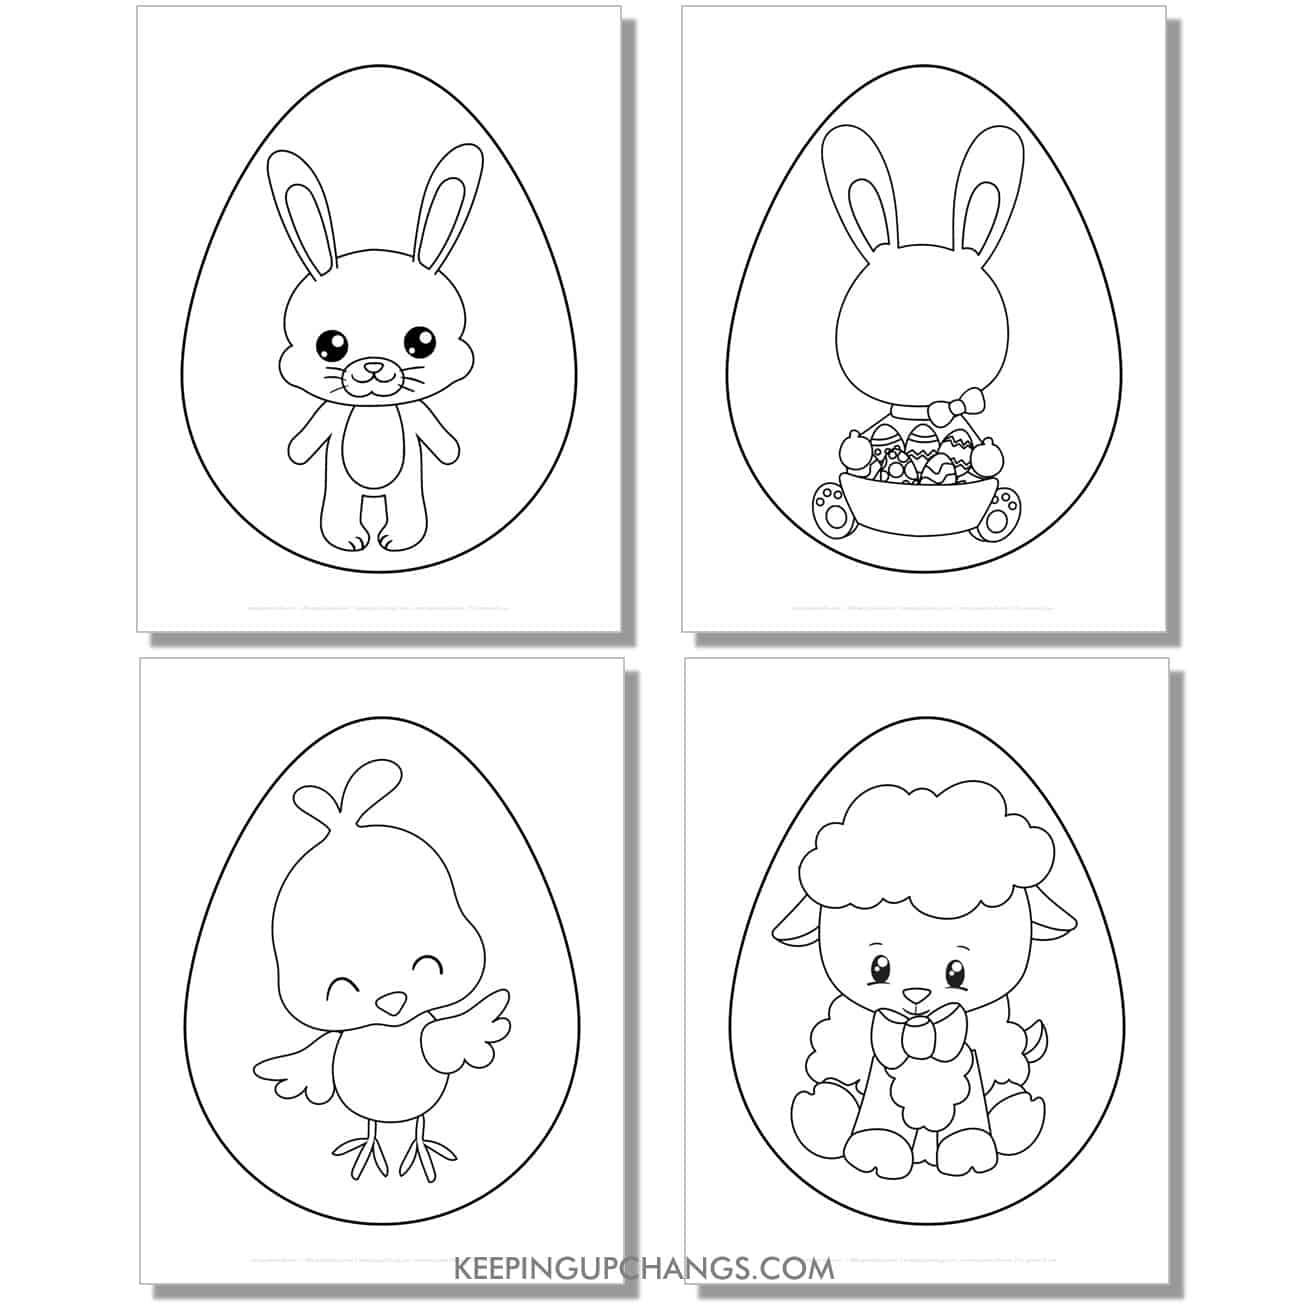 free large surprise easter egg craft bunny rabbit, chick, lamb.